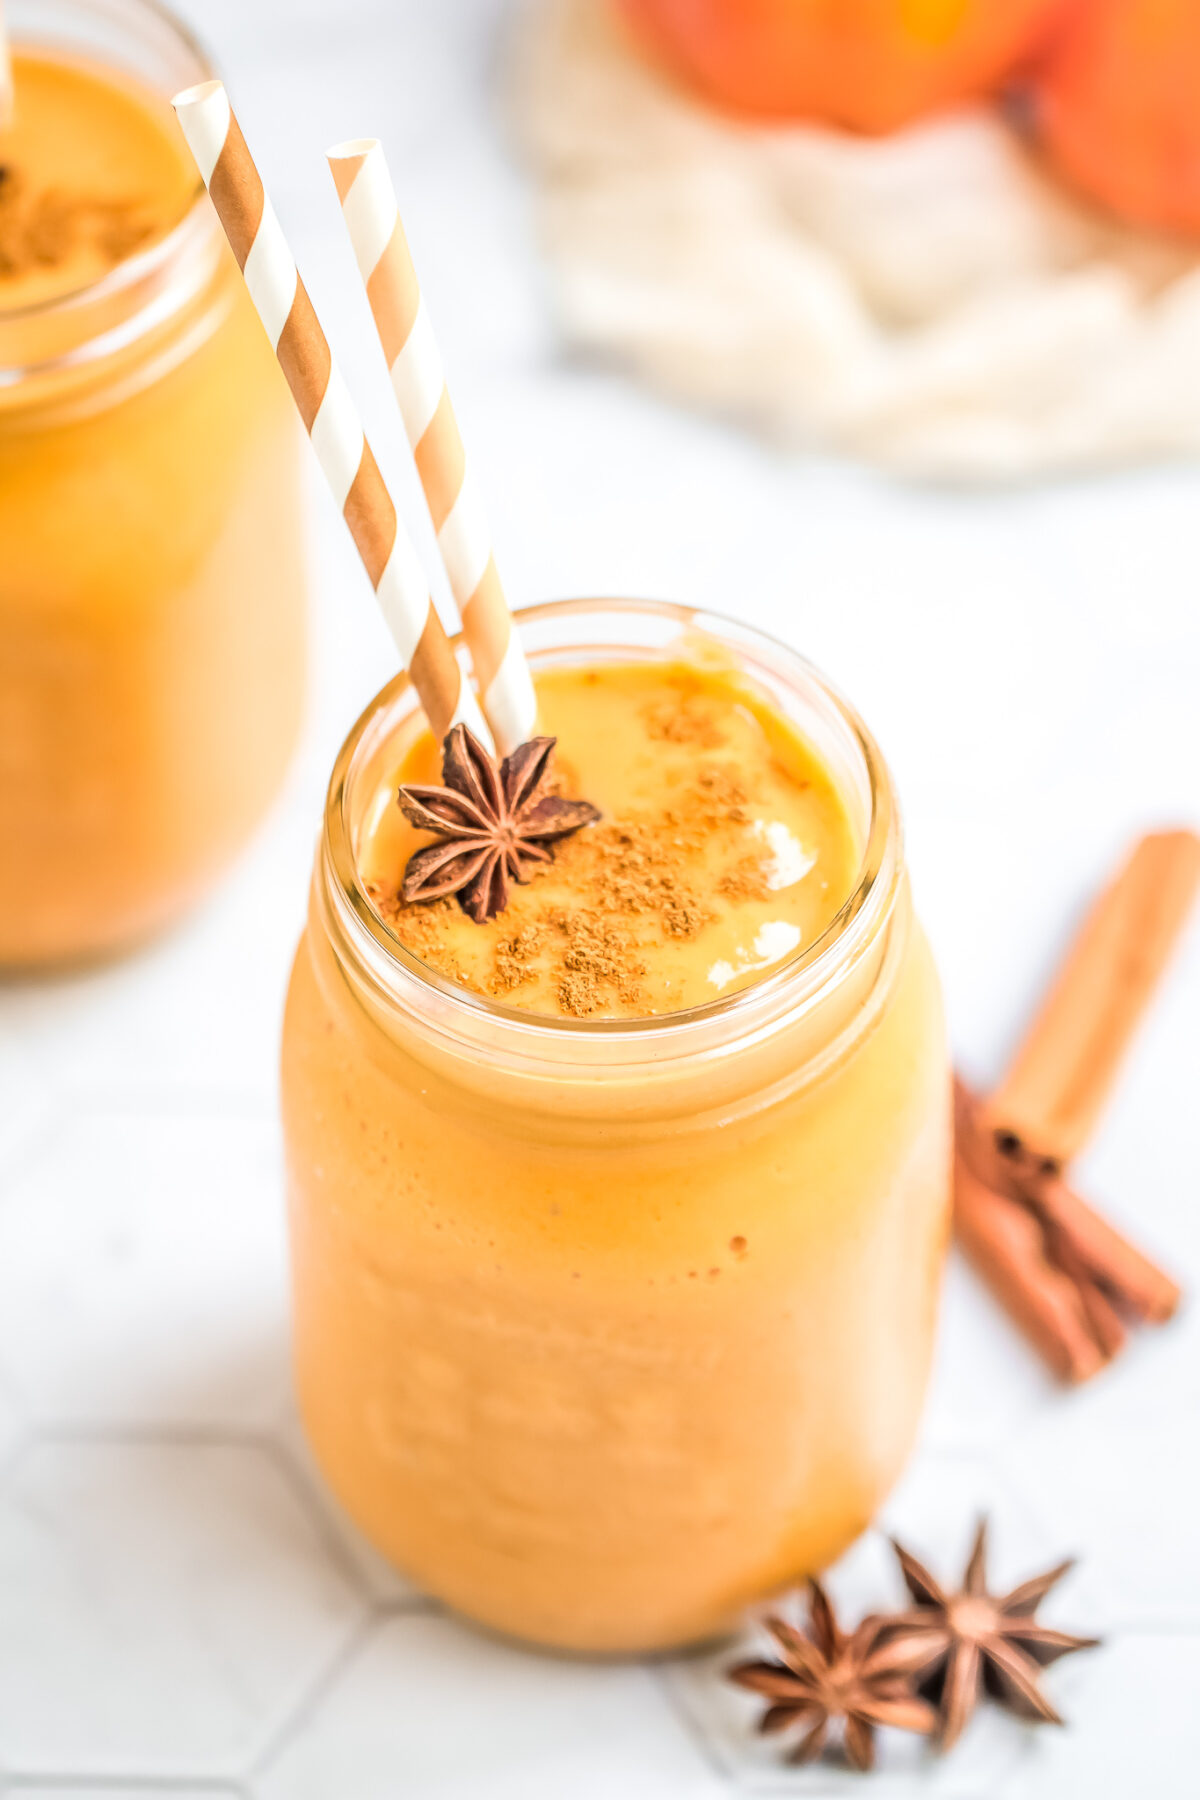 This sweet and creamy pumpkin pie smoothie tastes just like pumpkin pie filling. It’s perfect for a healthy and filling breakfast or dessert!